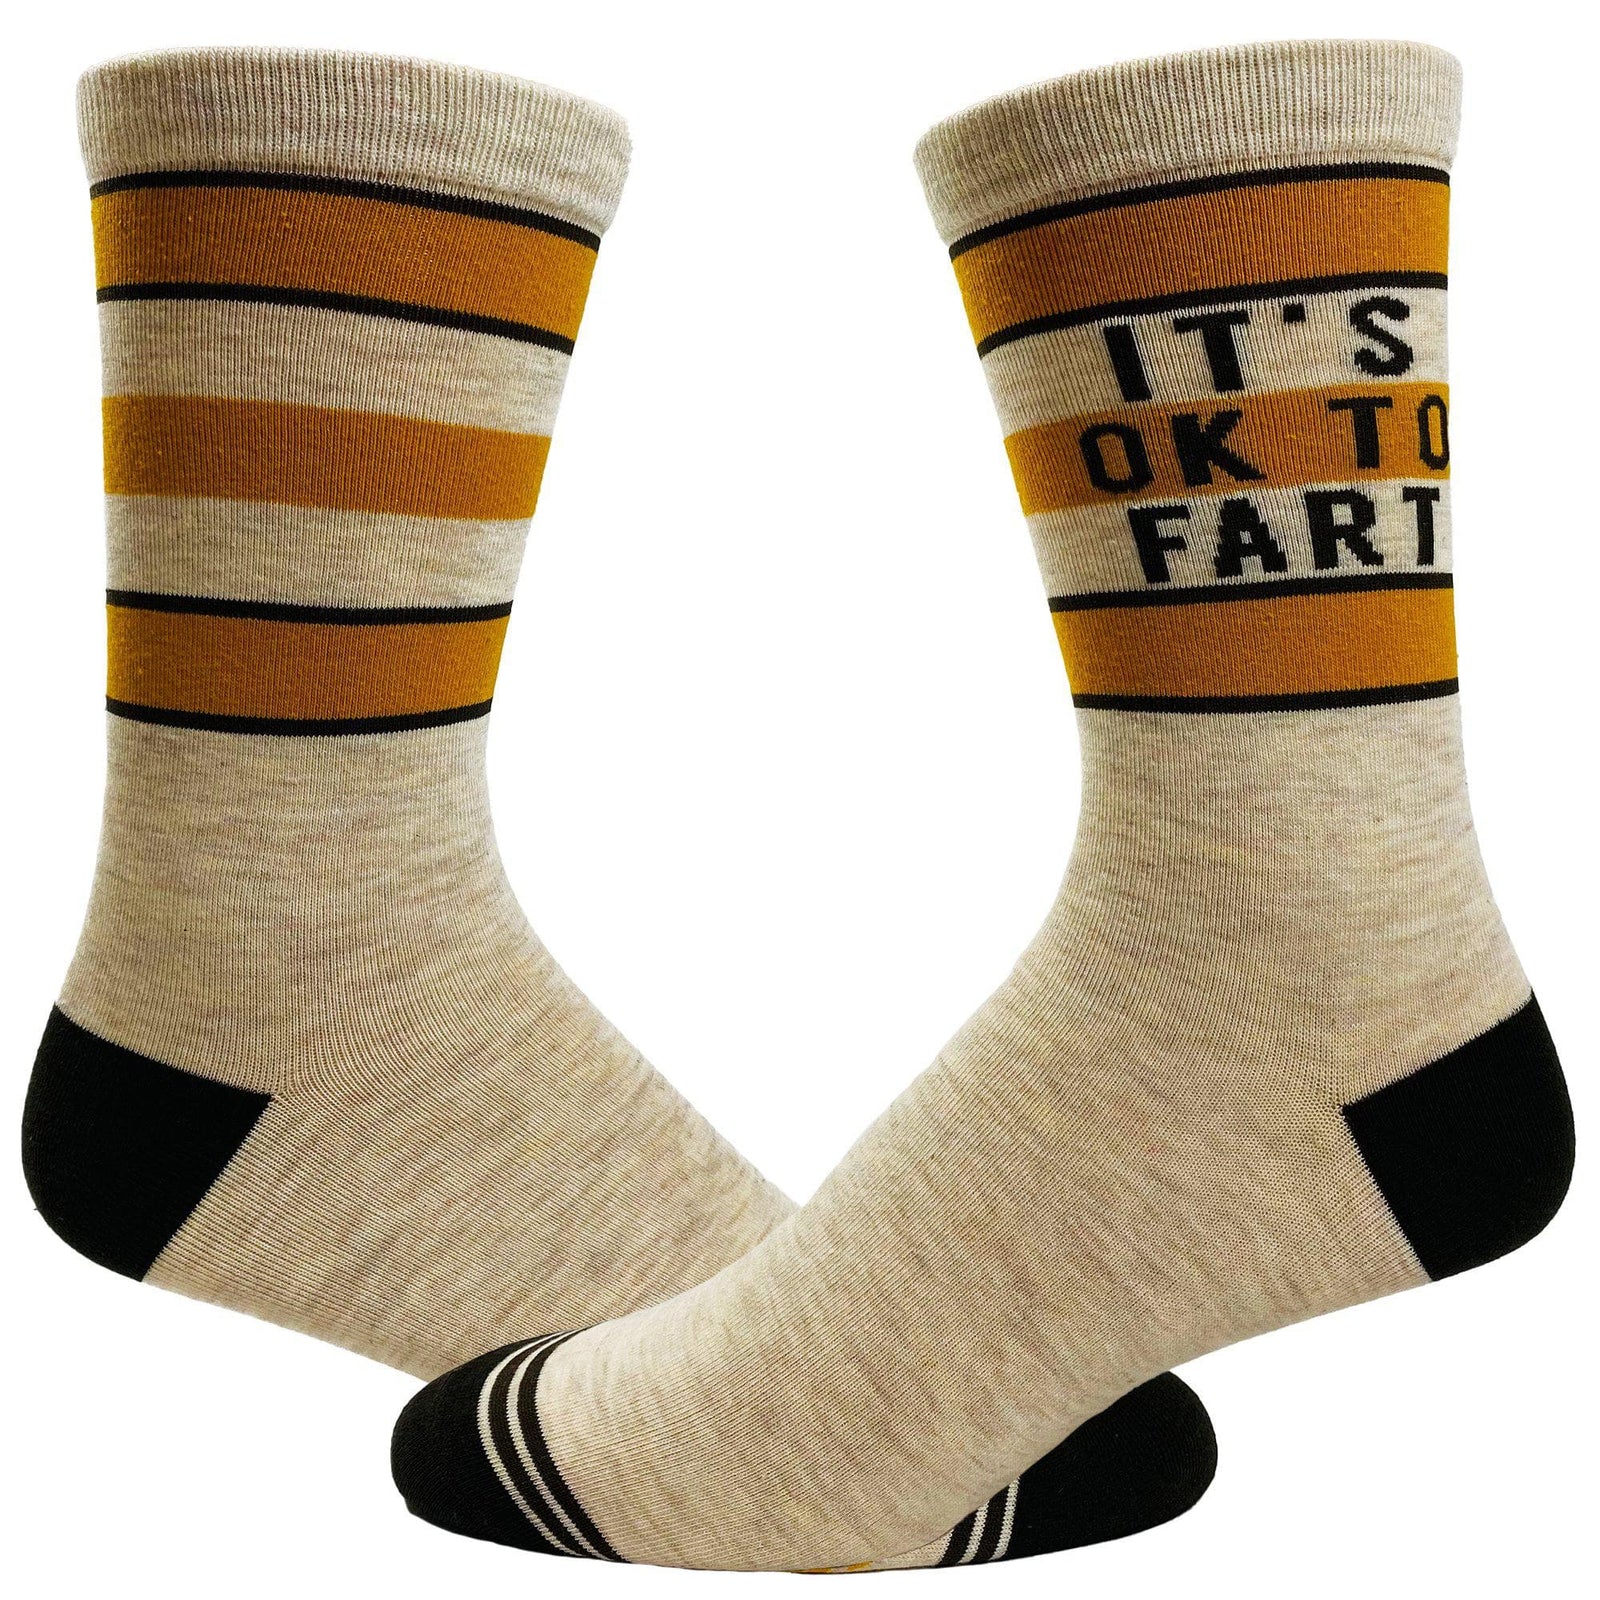  Shop Dog Days Poodle Socks - Comfy Adult Unisex Socks, Grey and  Yellow, Men's Shoe Size 8-11, Women's Shoe Size 6-12 : Clothing, Shoes &  Jewelry